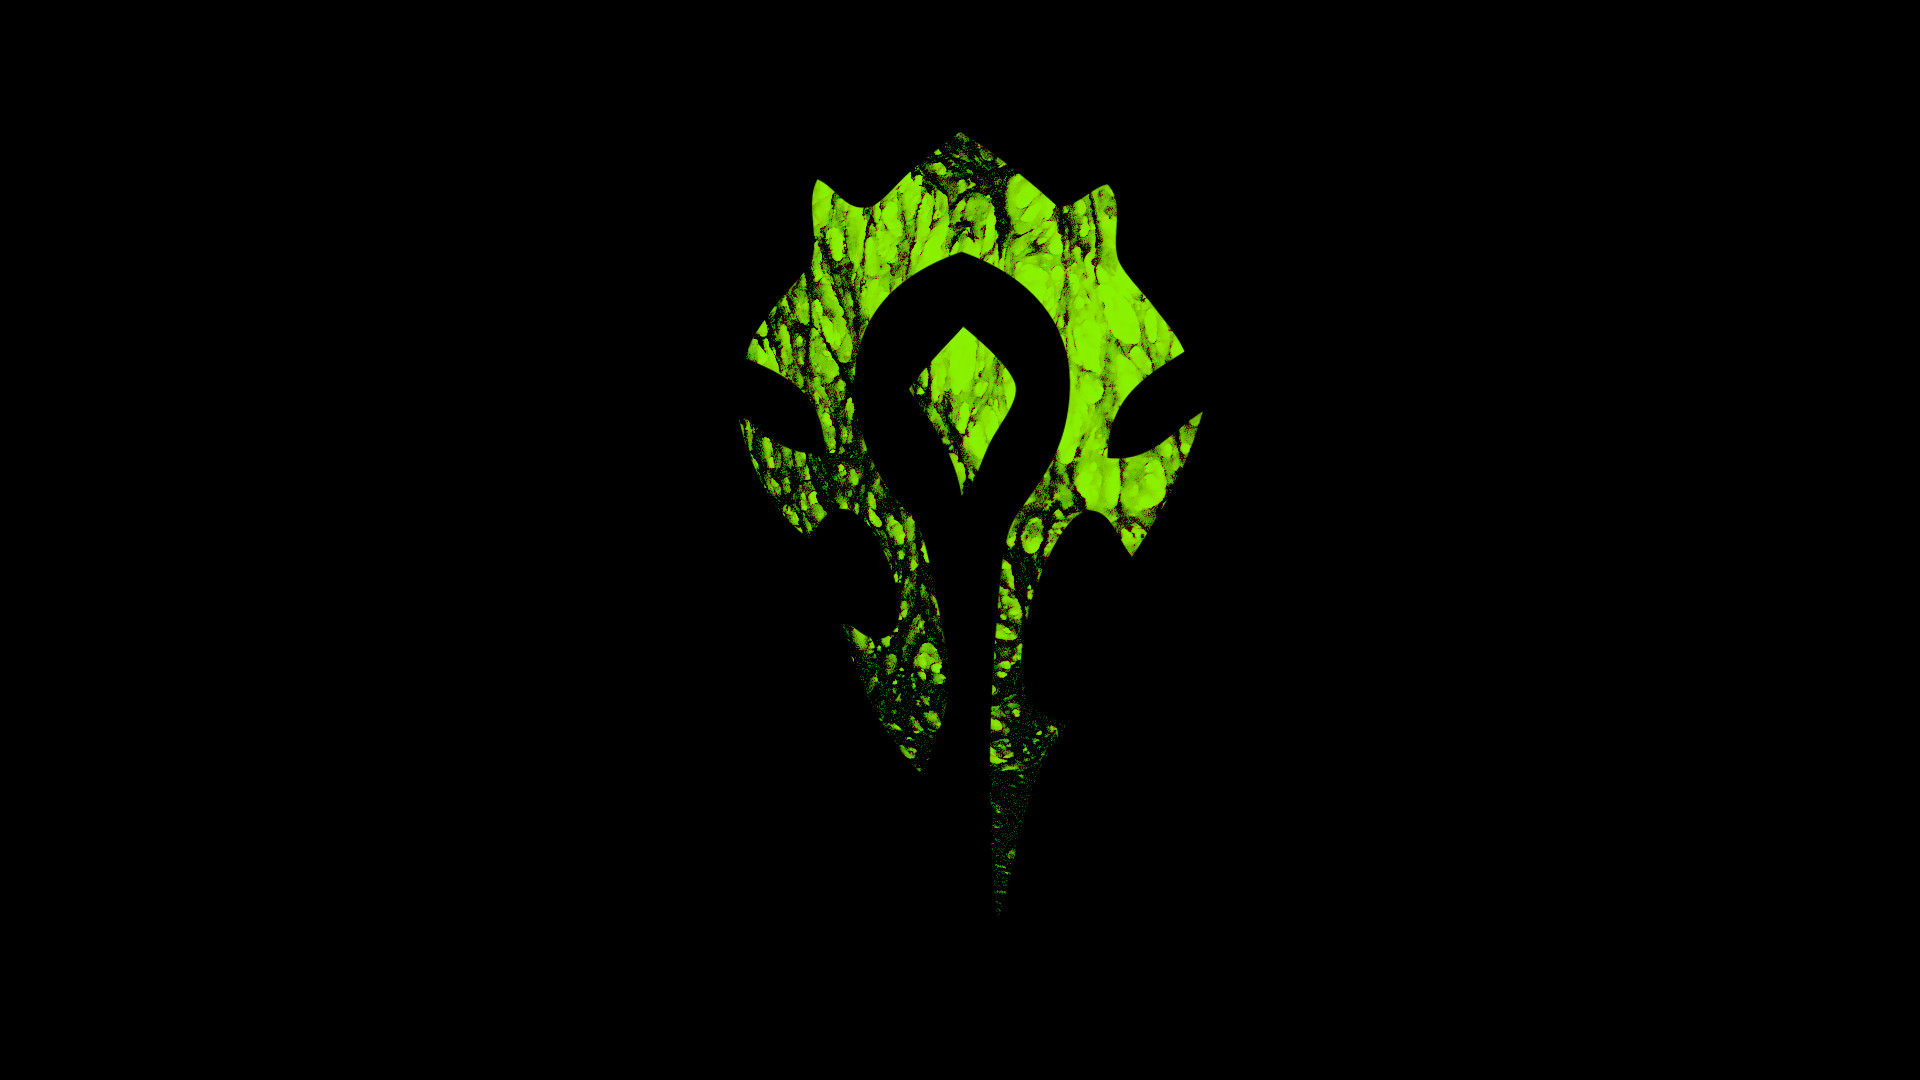 1920x1080 ImageMrglglglgl! has made a fel green desktop logo for the horde. I think  he did a good job check it out.